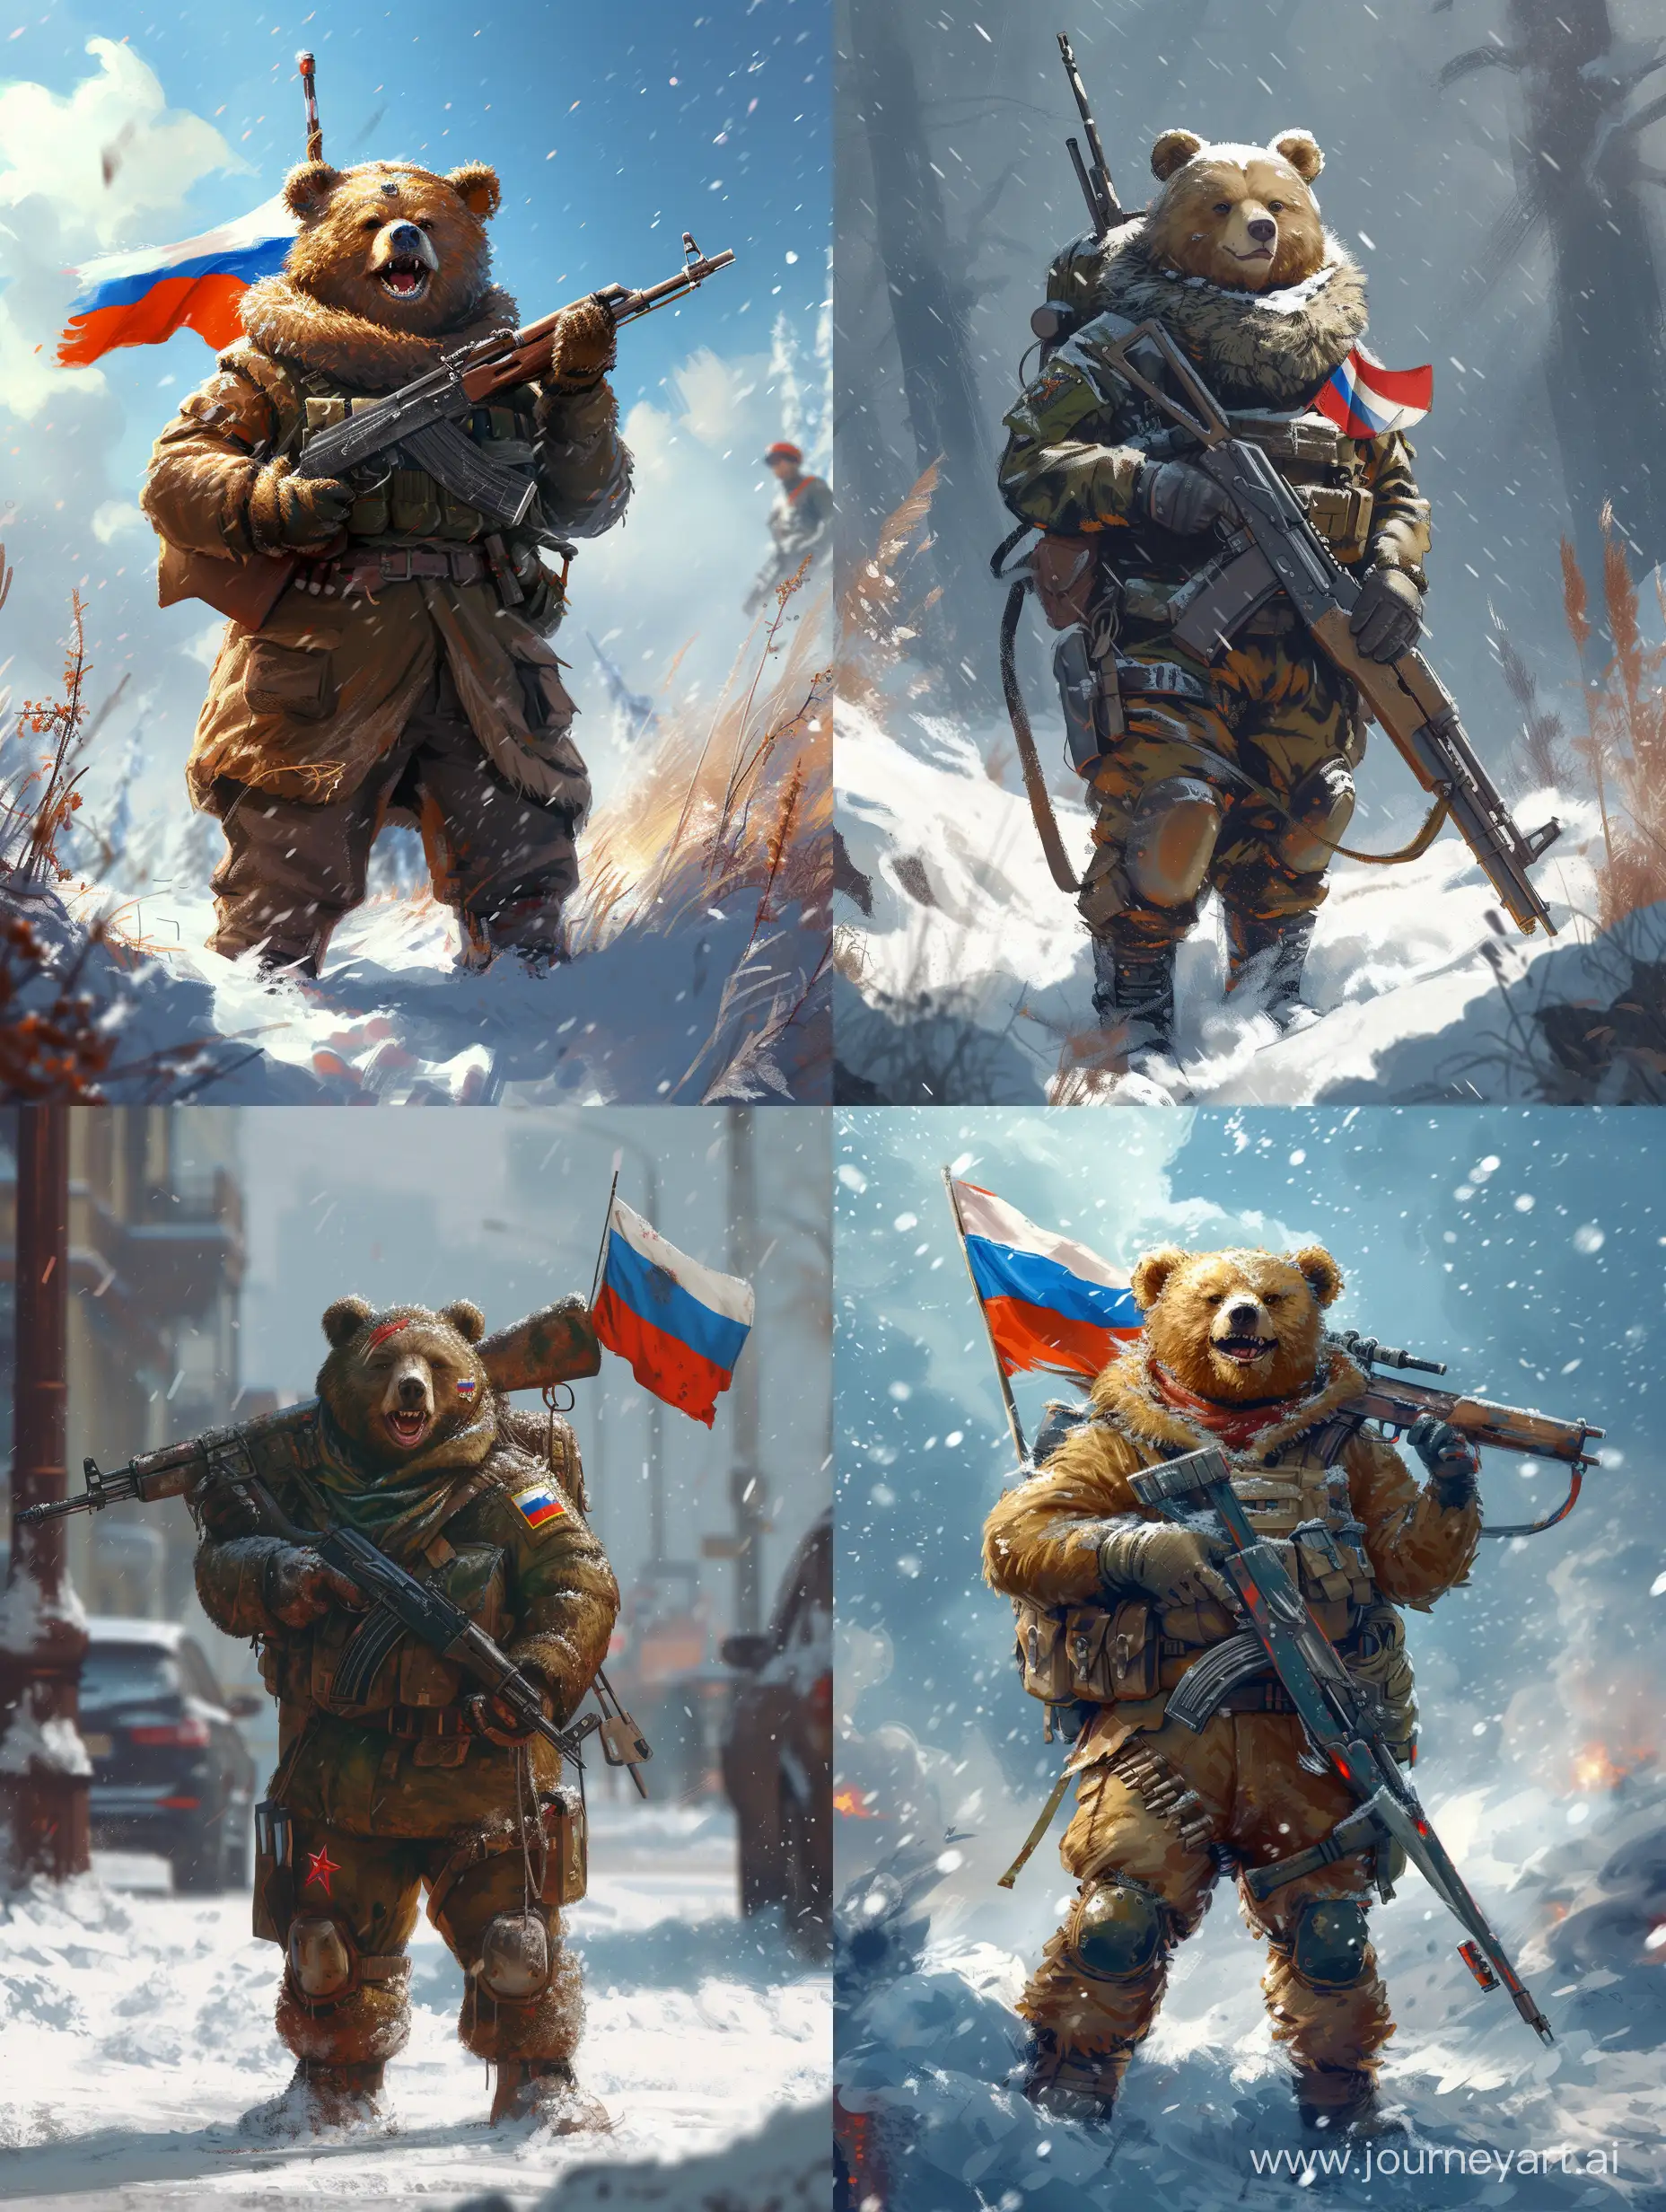 Joyful-Russian-Bear-Furry-Art-with-Militaristic-Flair-in-Moscow-Snow